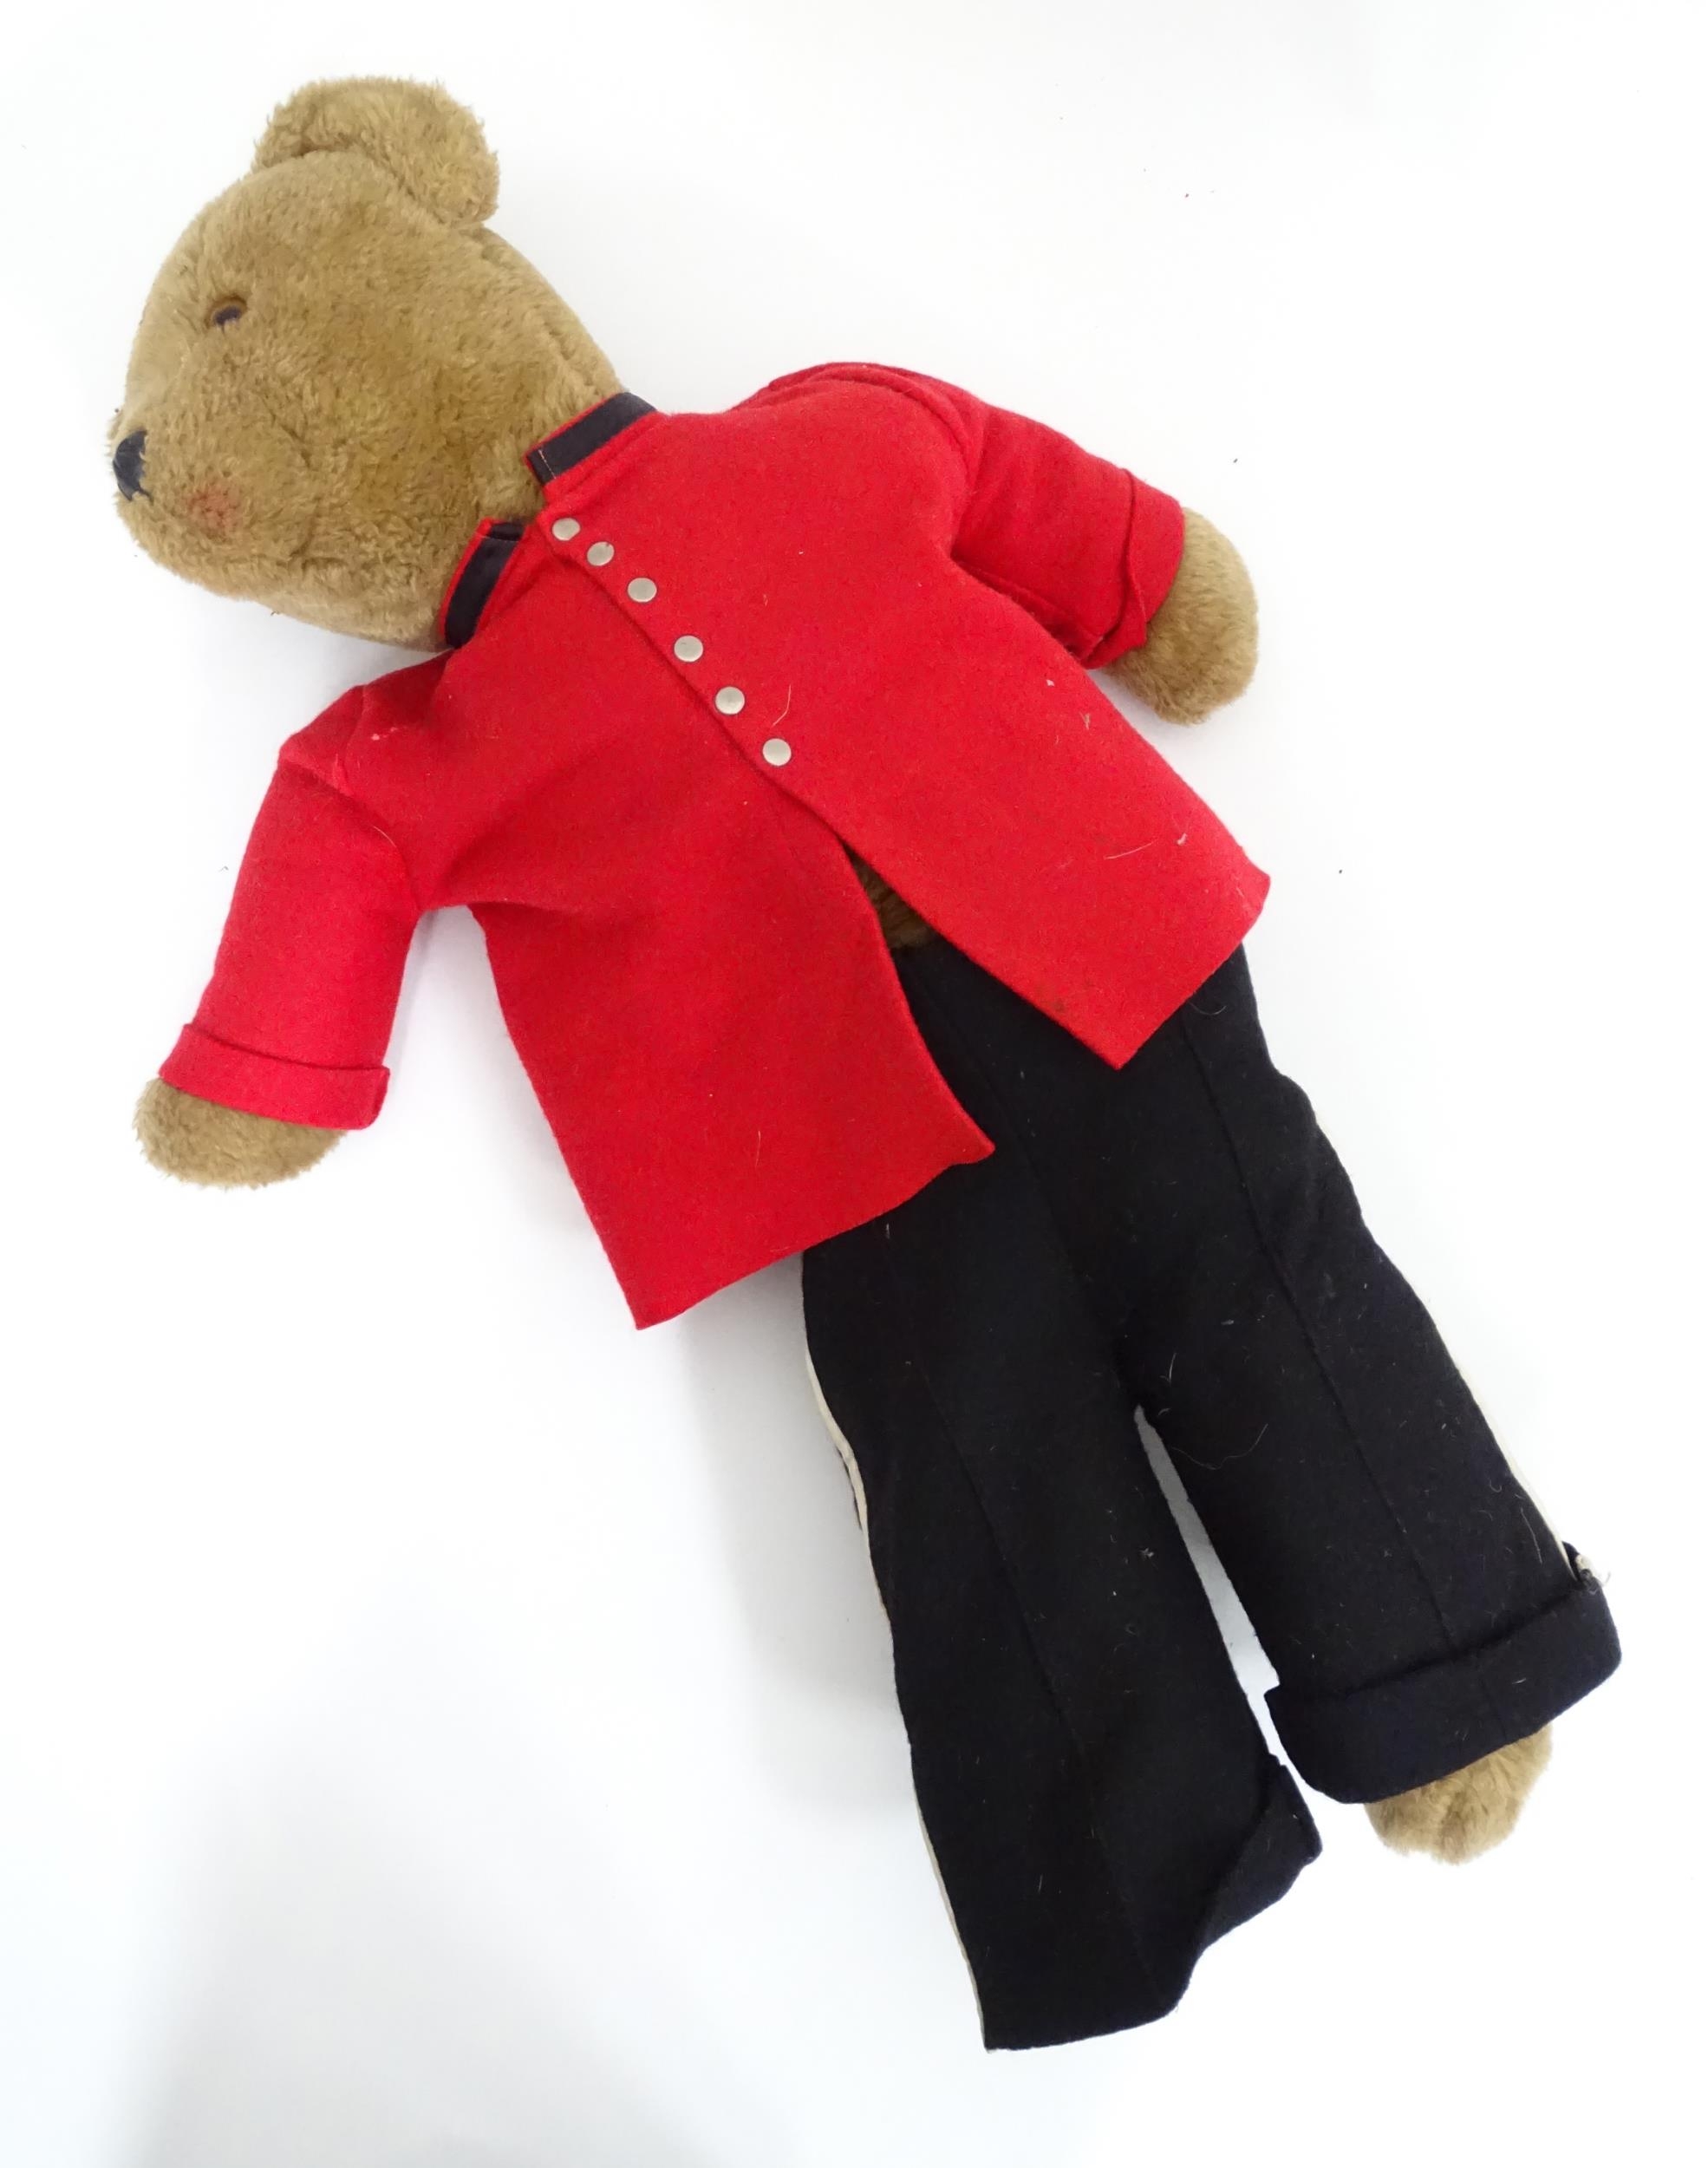 Alresford Crafts Ltd Teddy Bear - dressed as a Chelsea Pensioner Please Note - we do not make - Image 4 of 5